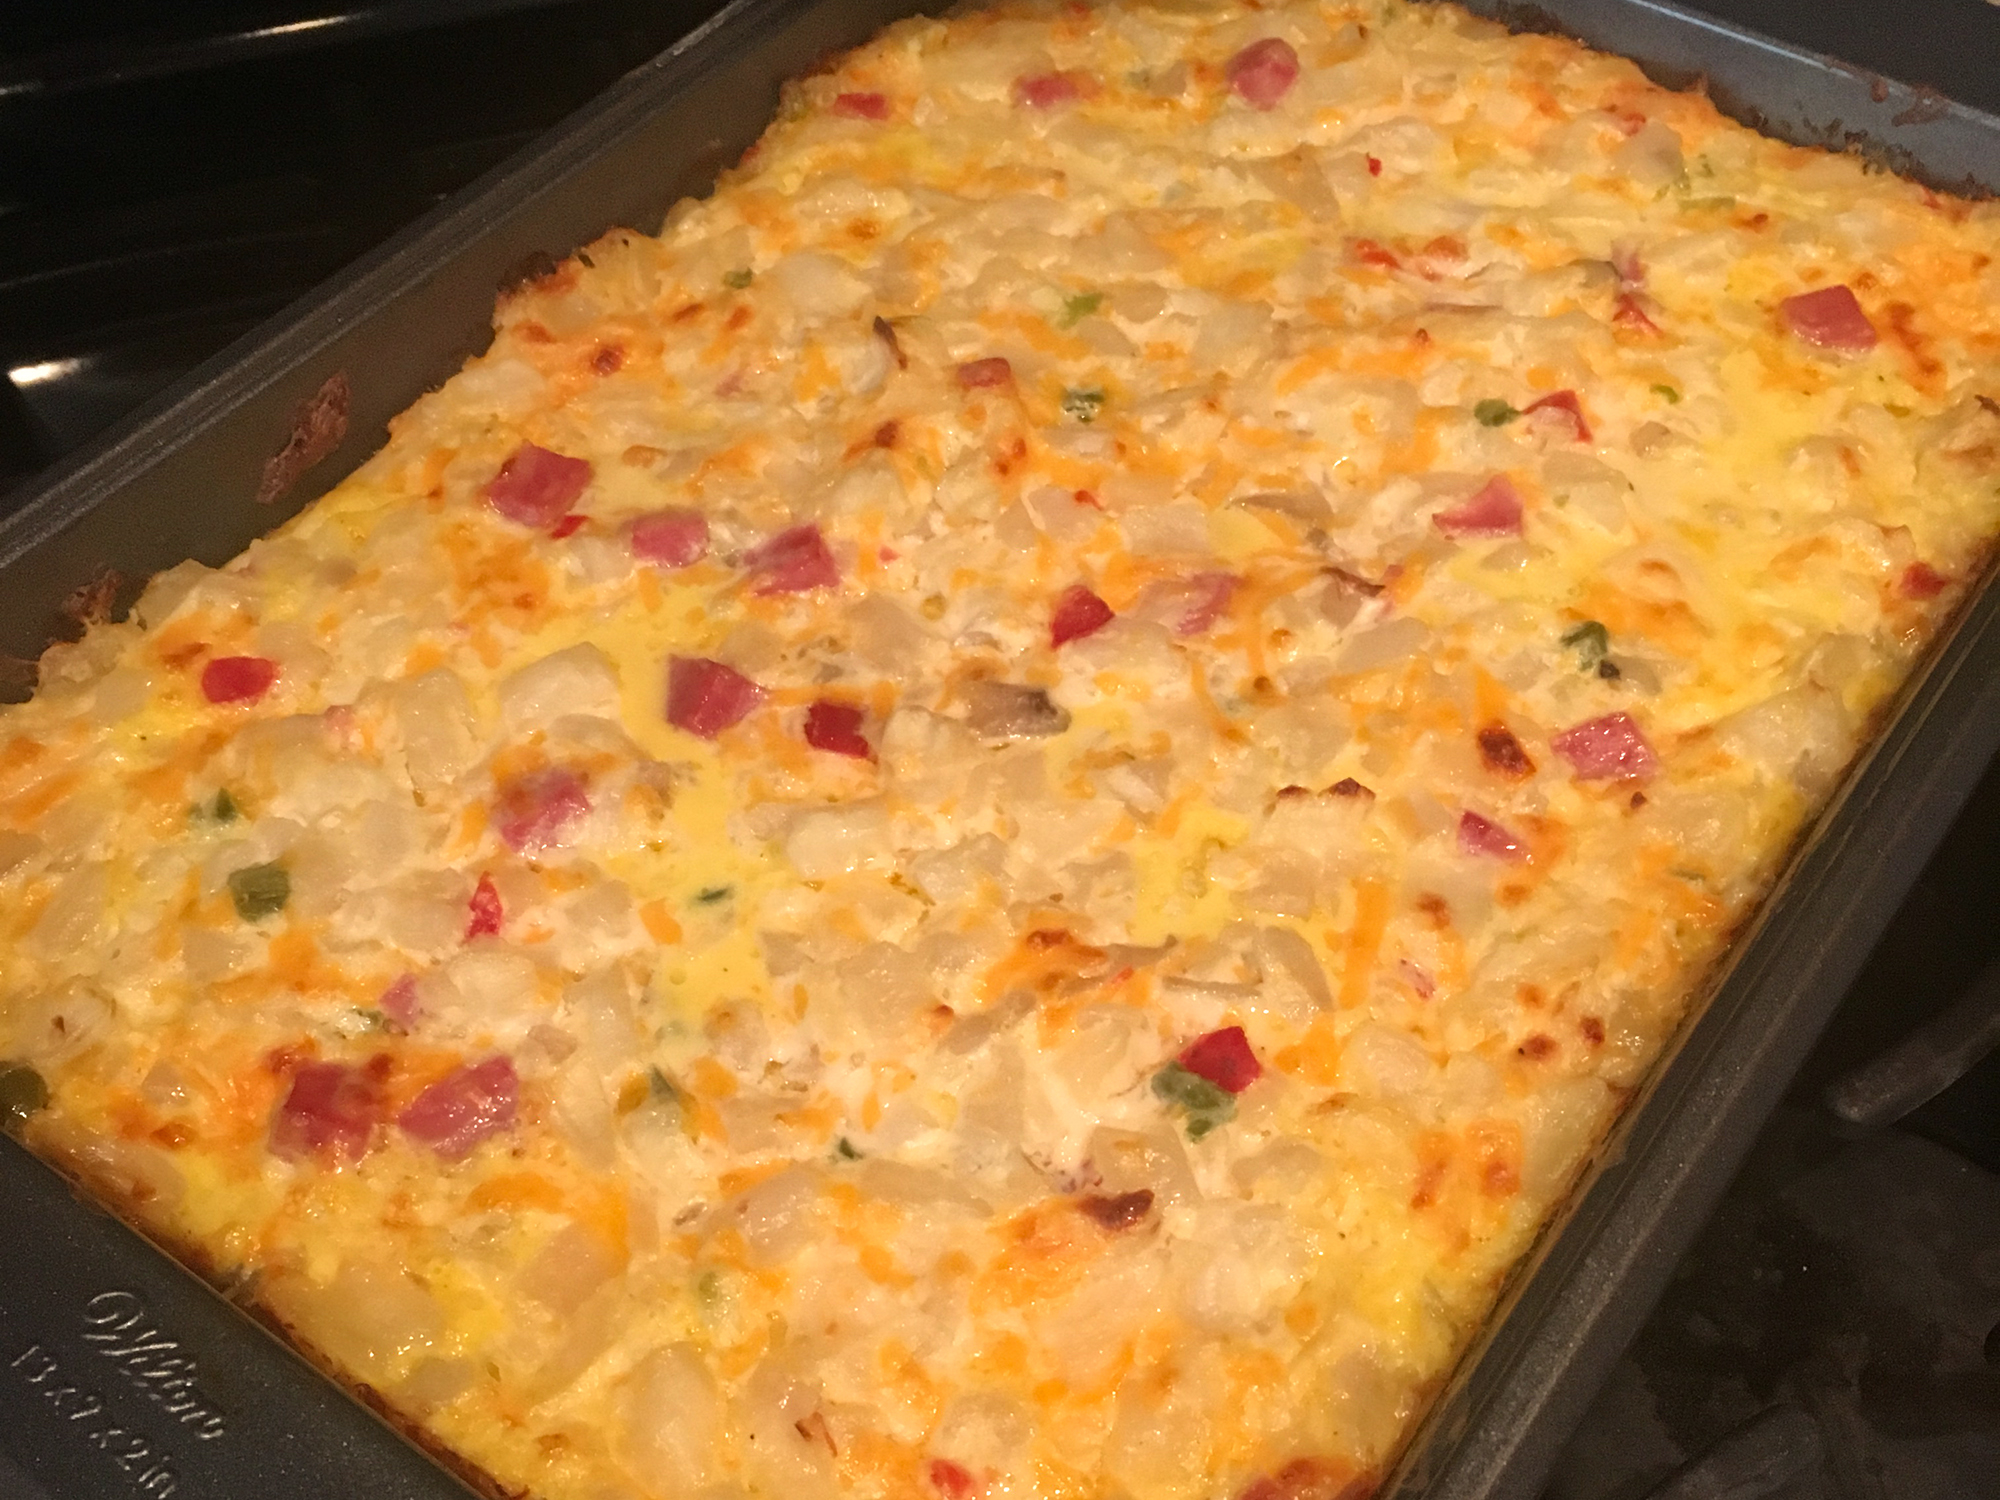 close up view of a Breakfast Casserole in a baking dish on a stove